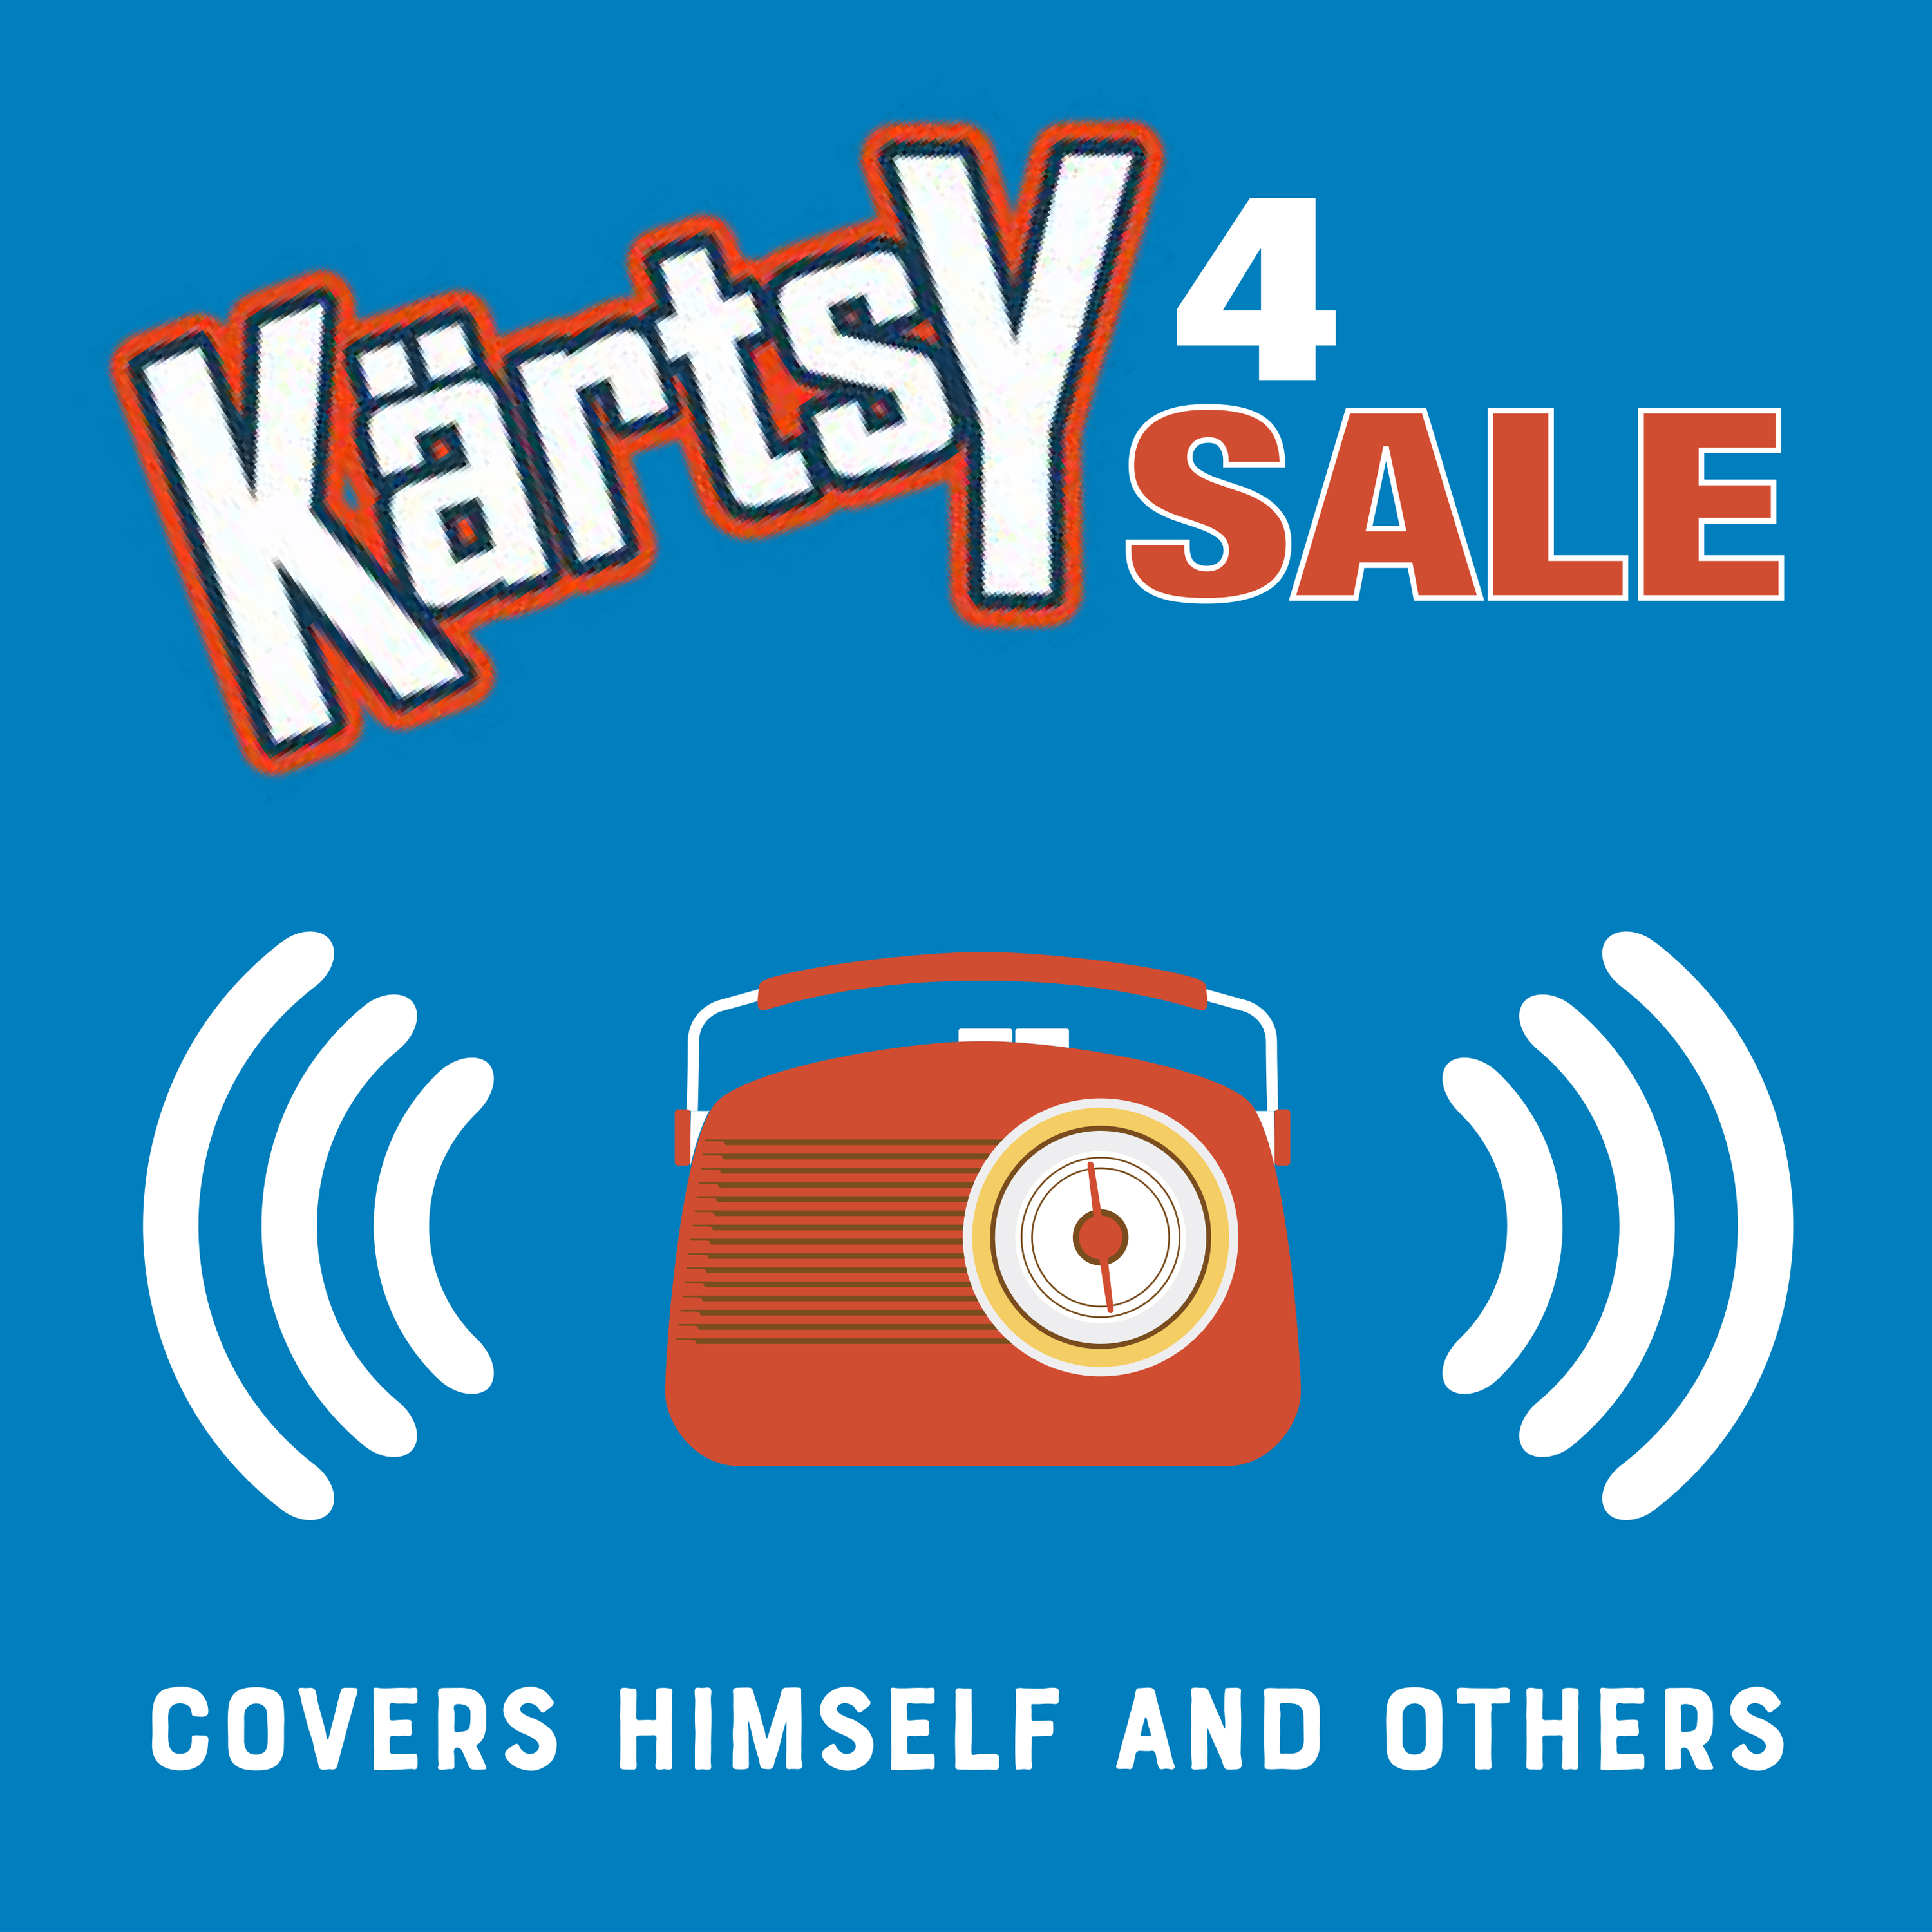 K rtsy 4 Sale - Covers Himself And Others - CD